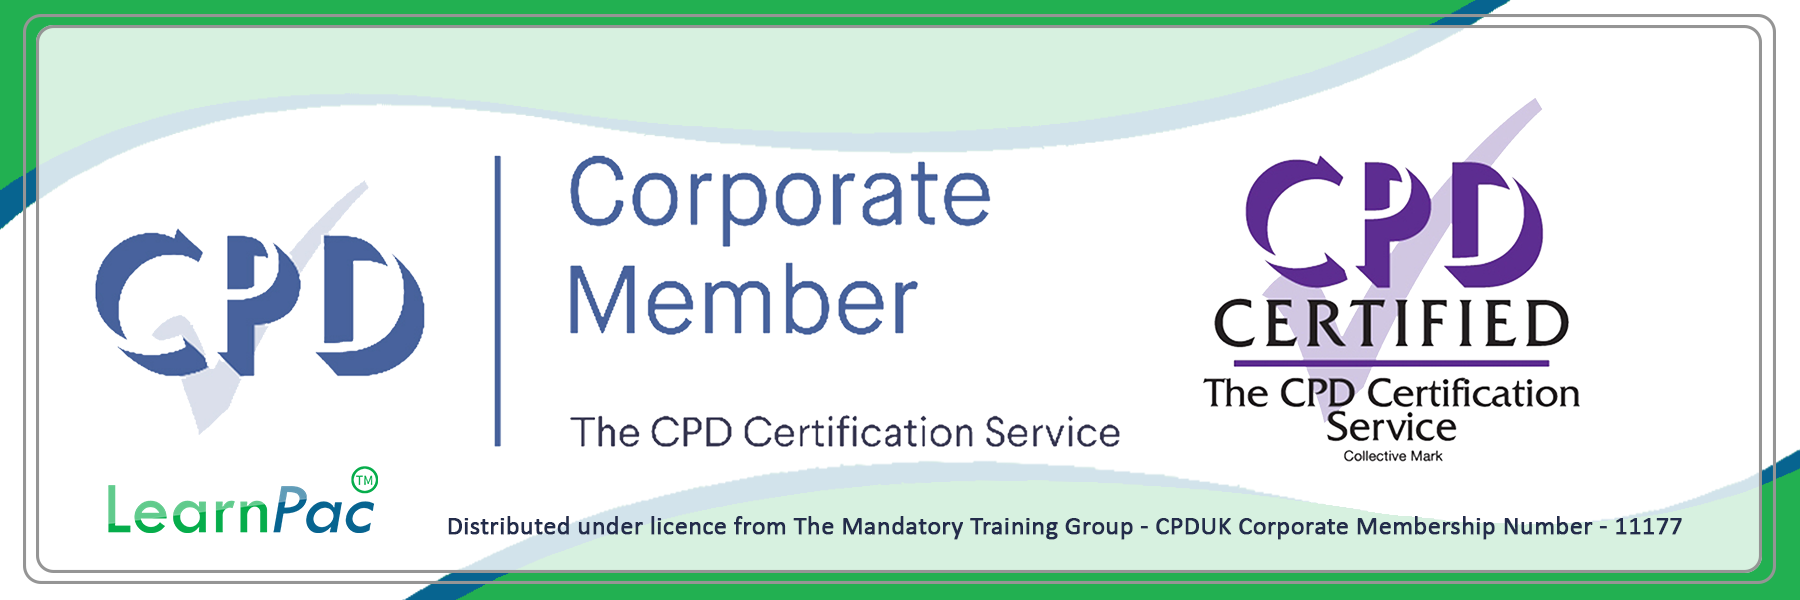 Delegation and Referrals - Enhanced Dental CPD Course - Online Learning Courses - E-Learning Courses - LearnPac Systems UK -